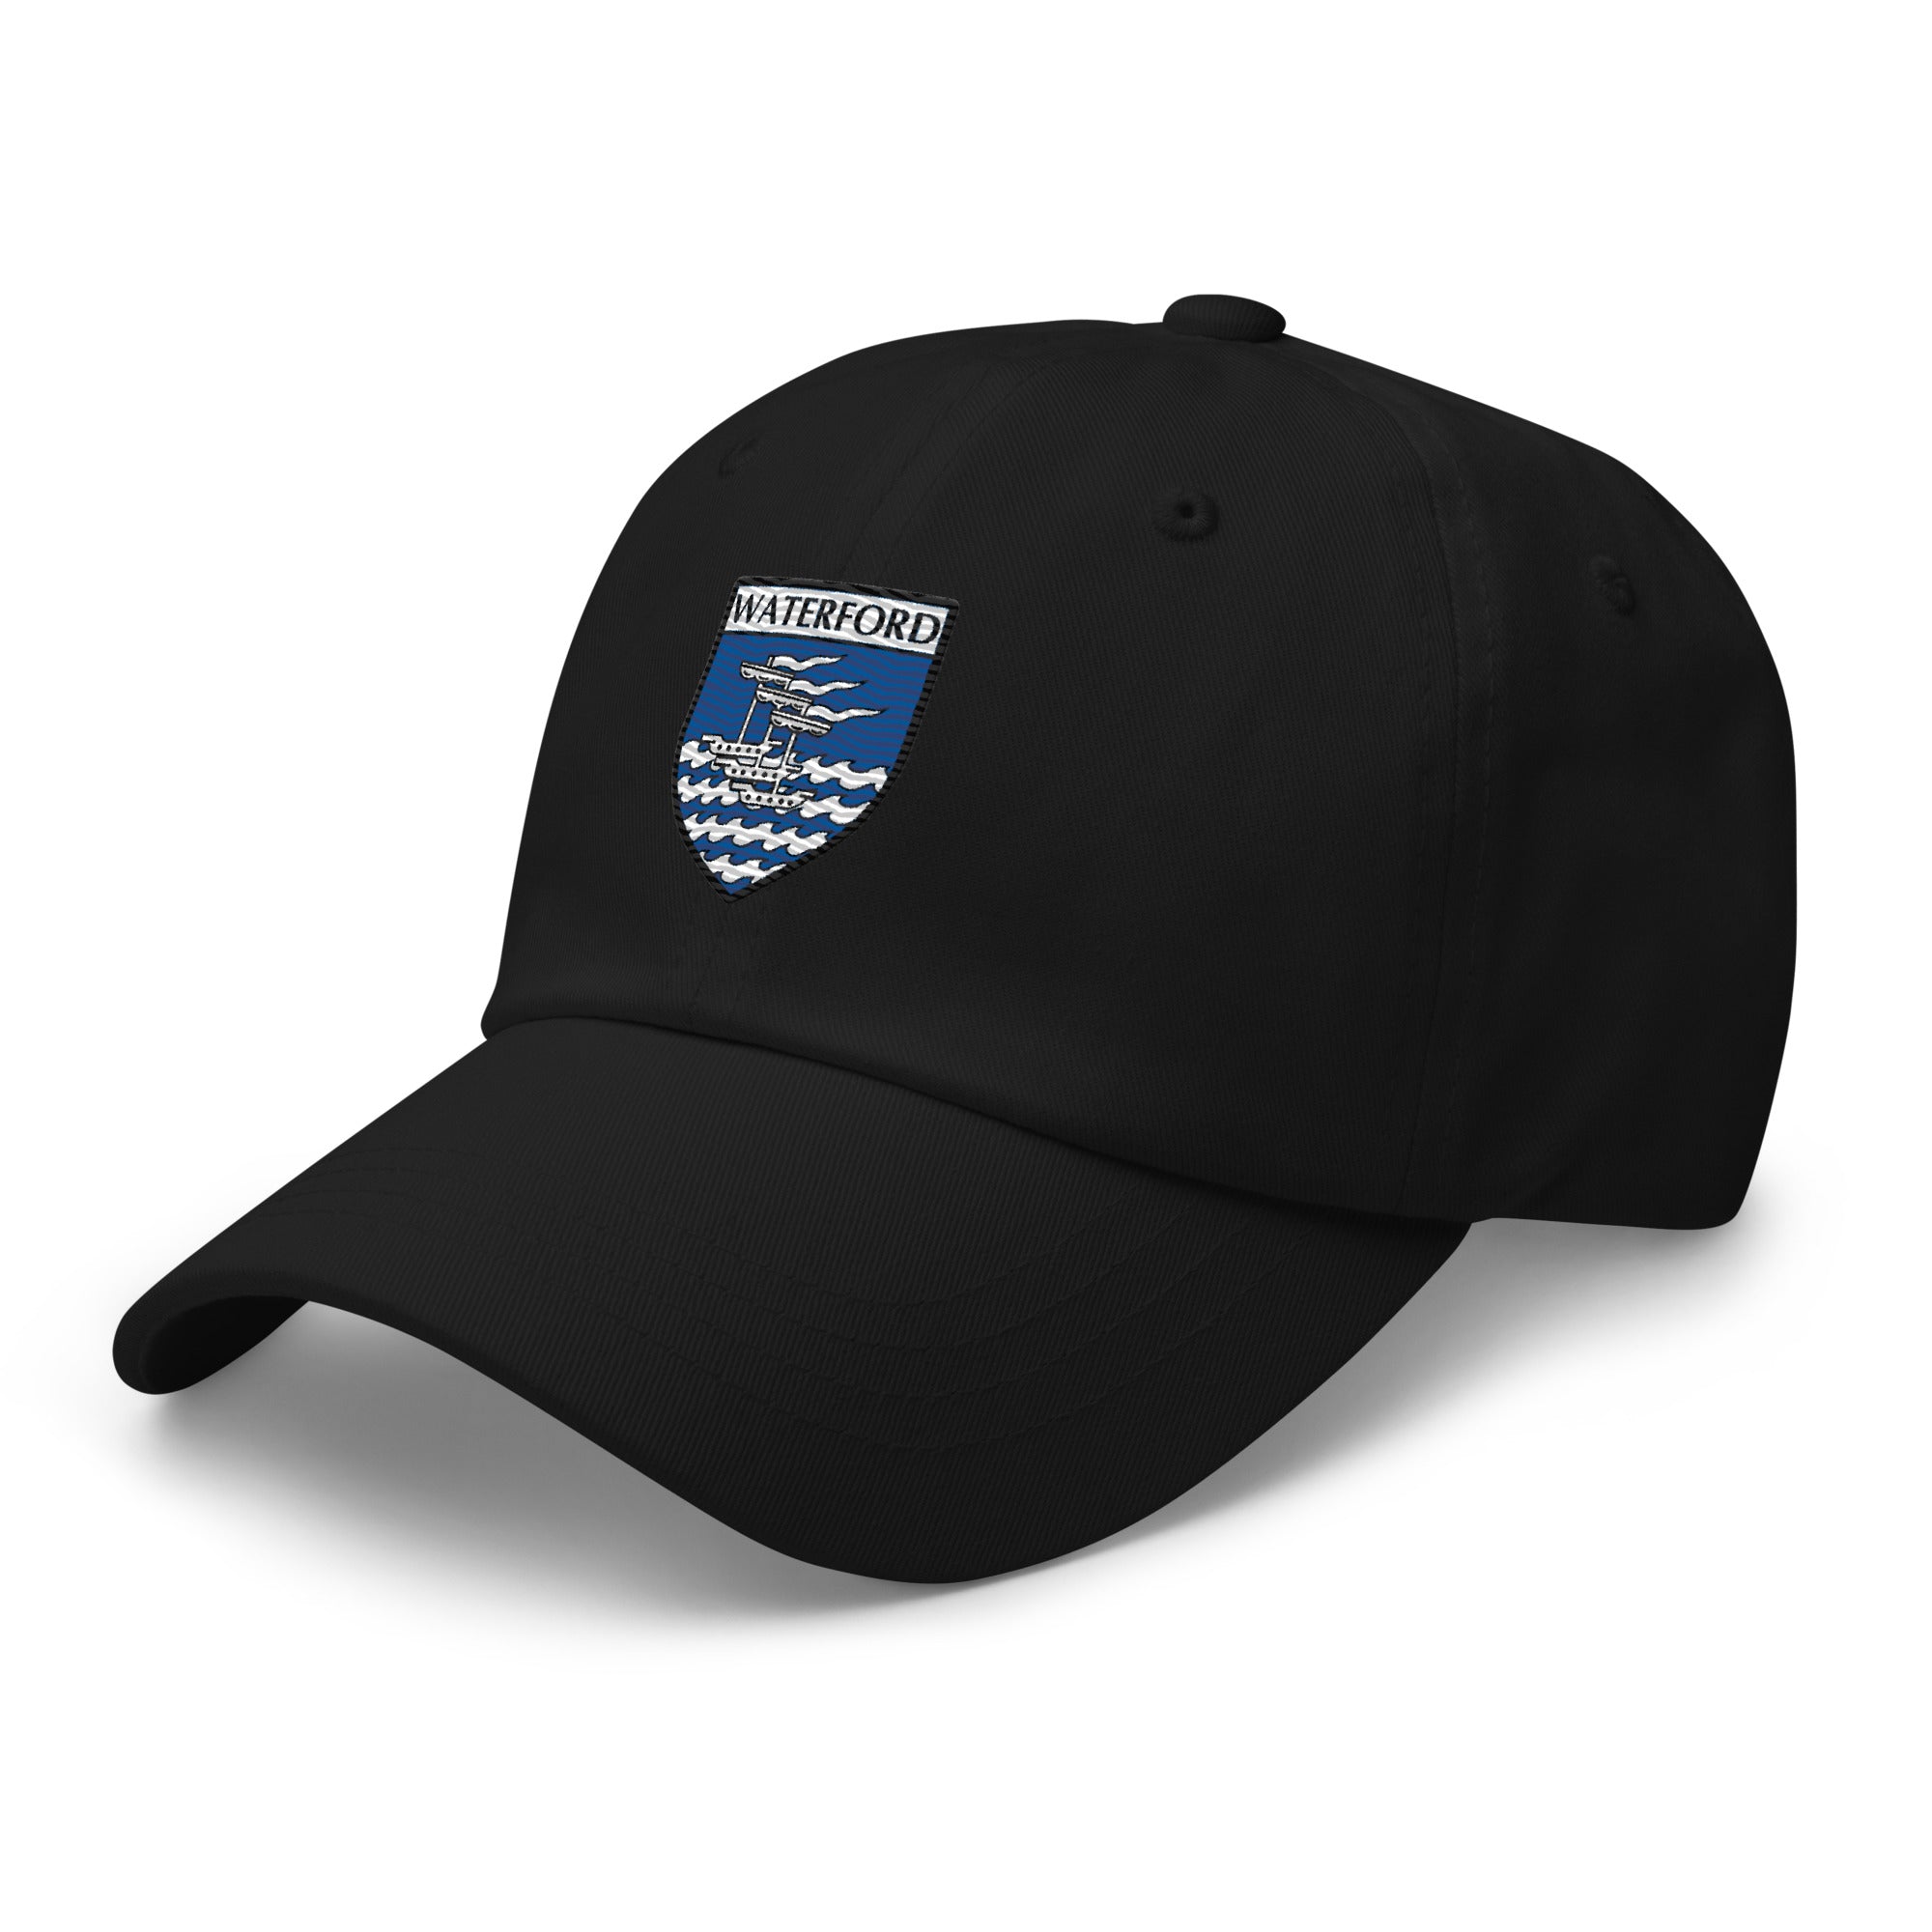 County Waterford Supporters Crest Baseball Cap Black County Wear